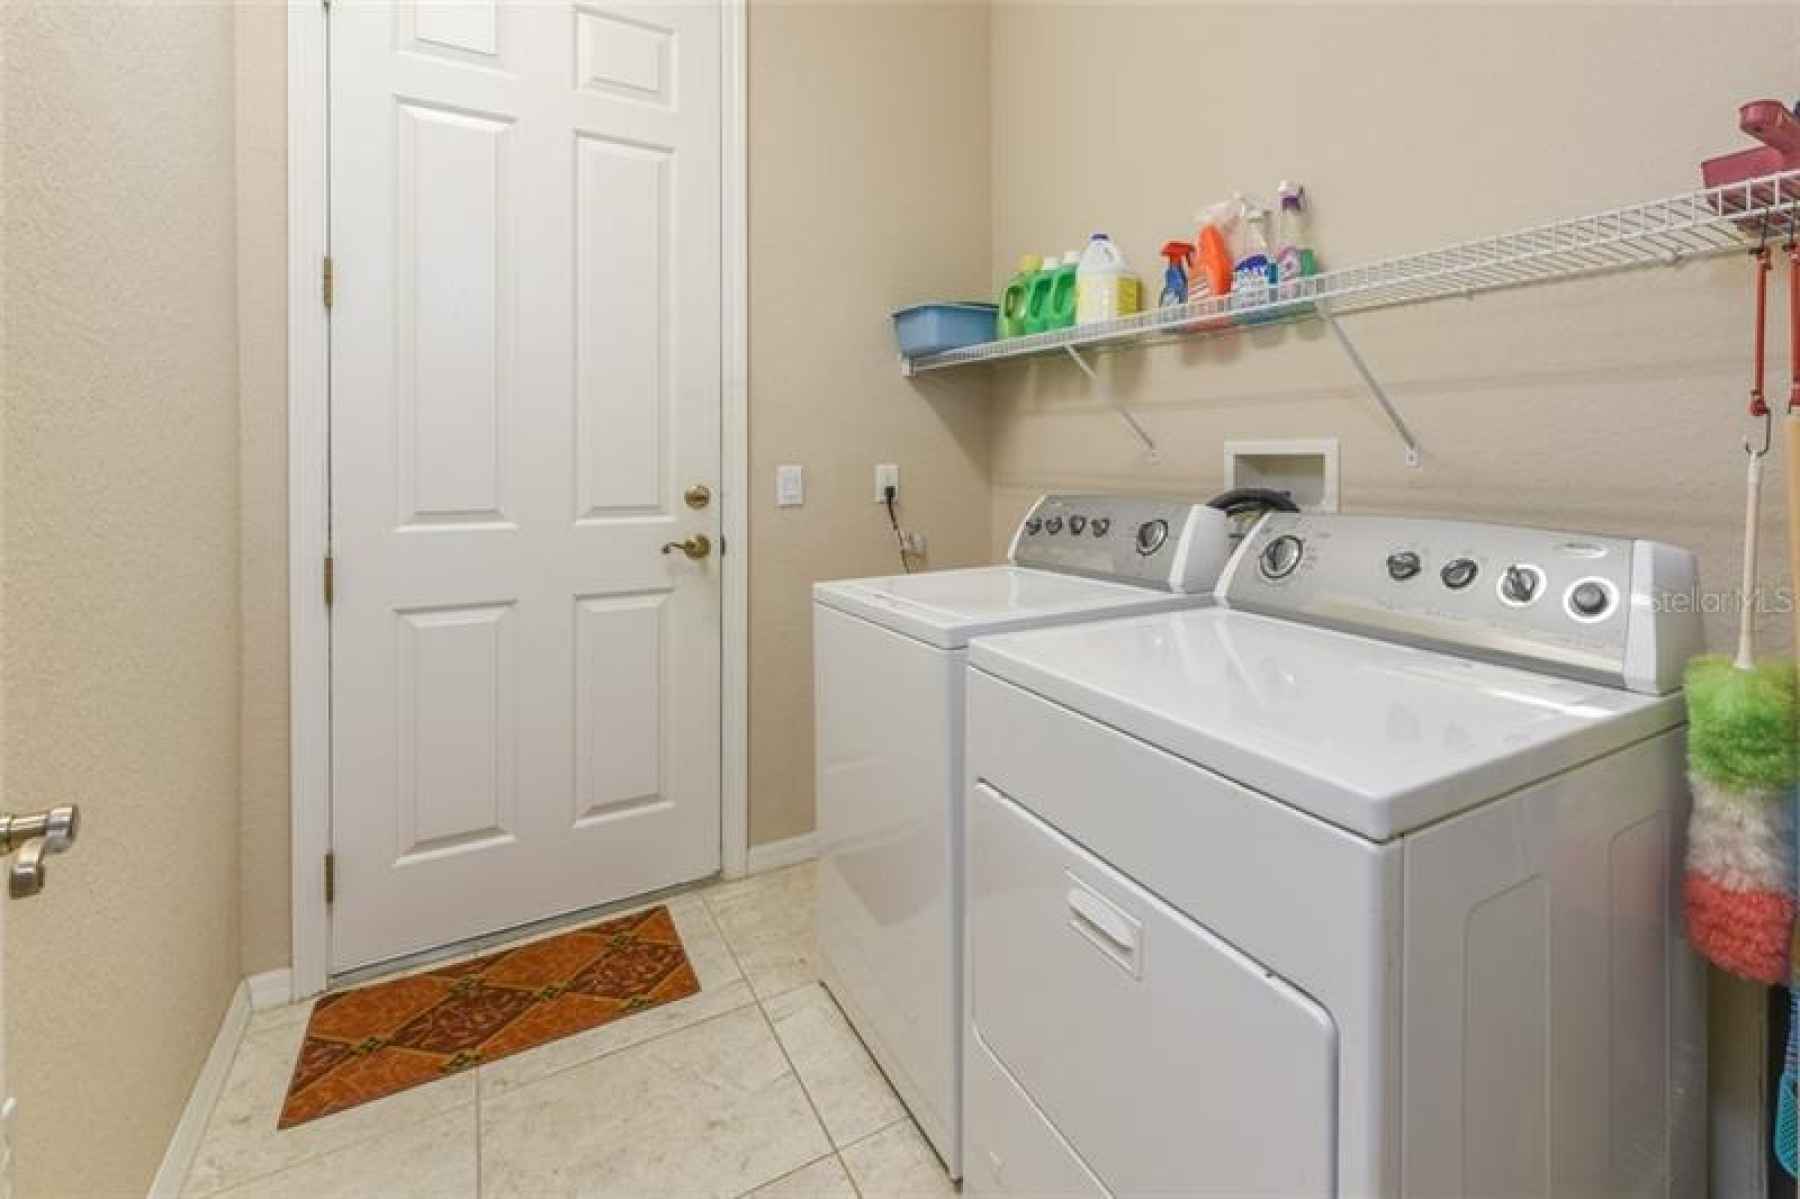 Laundry Room to Garage